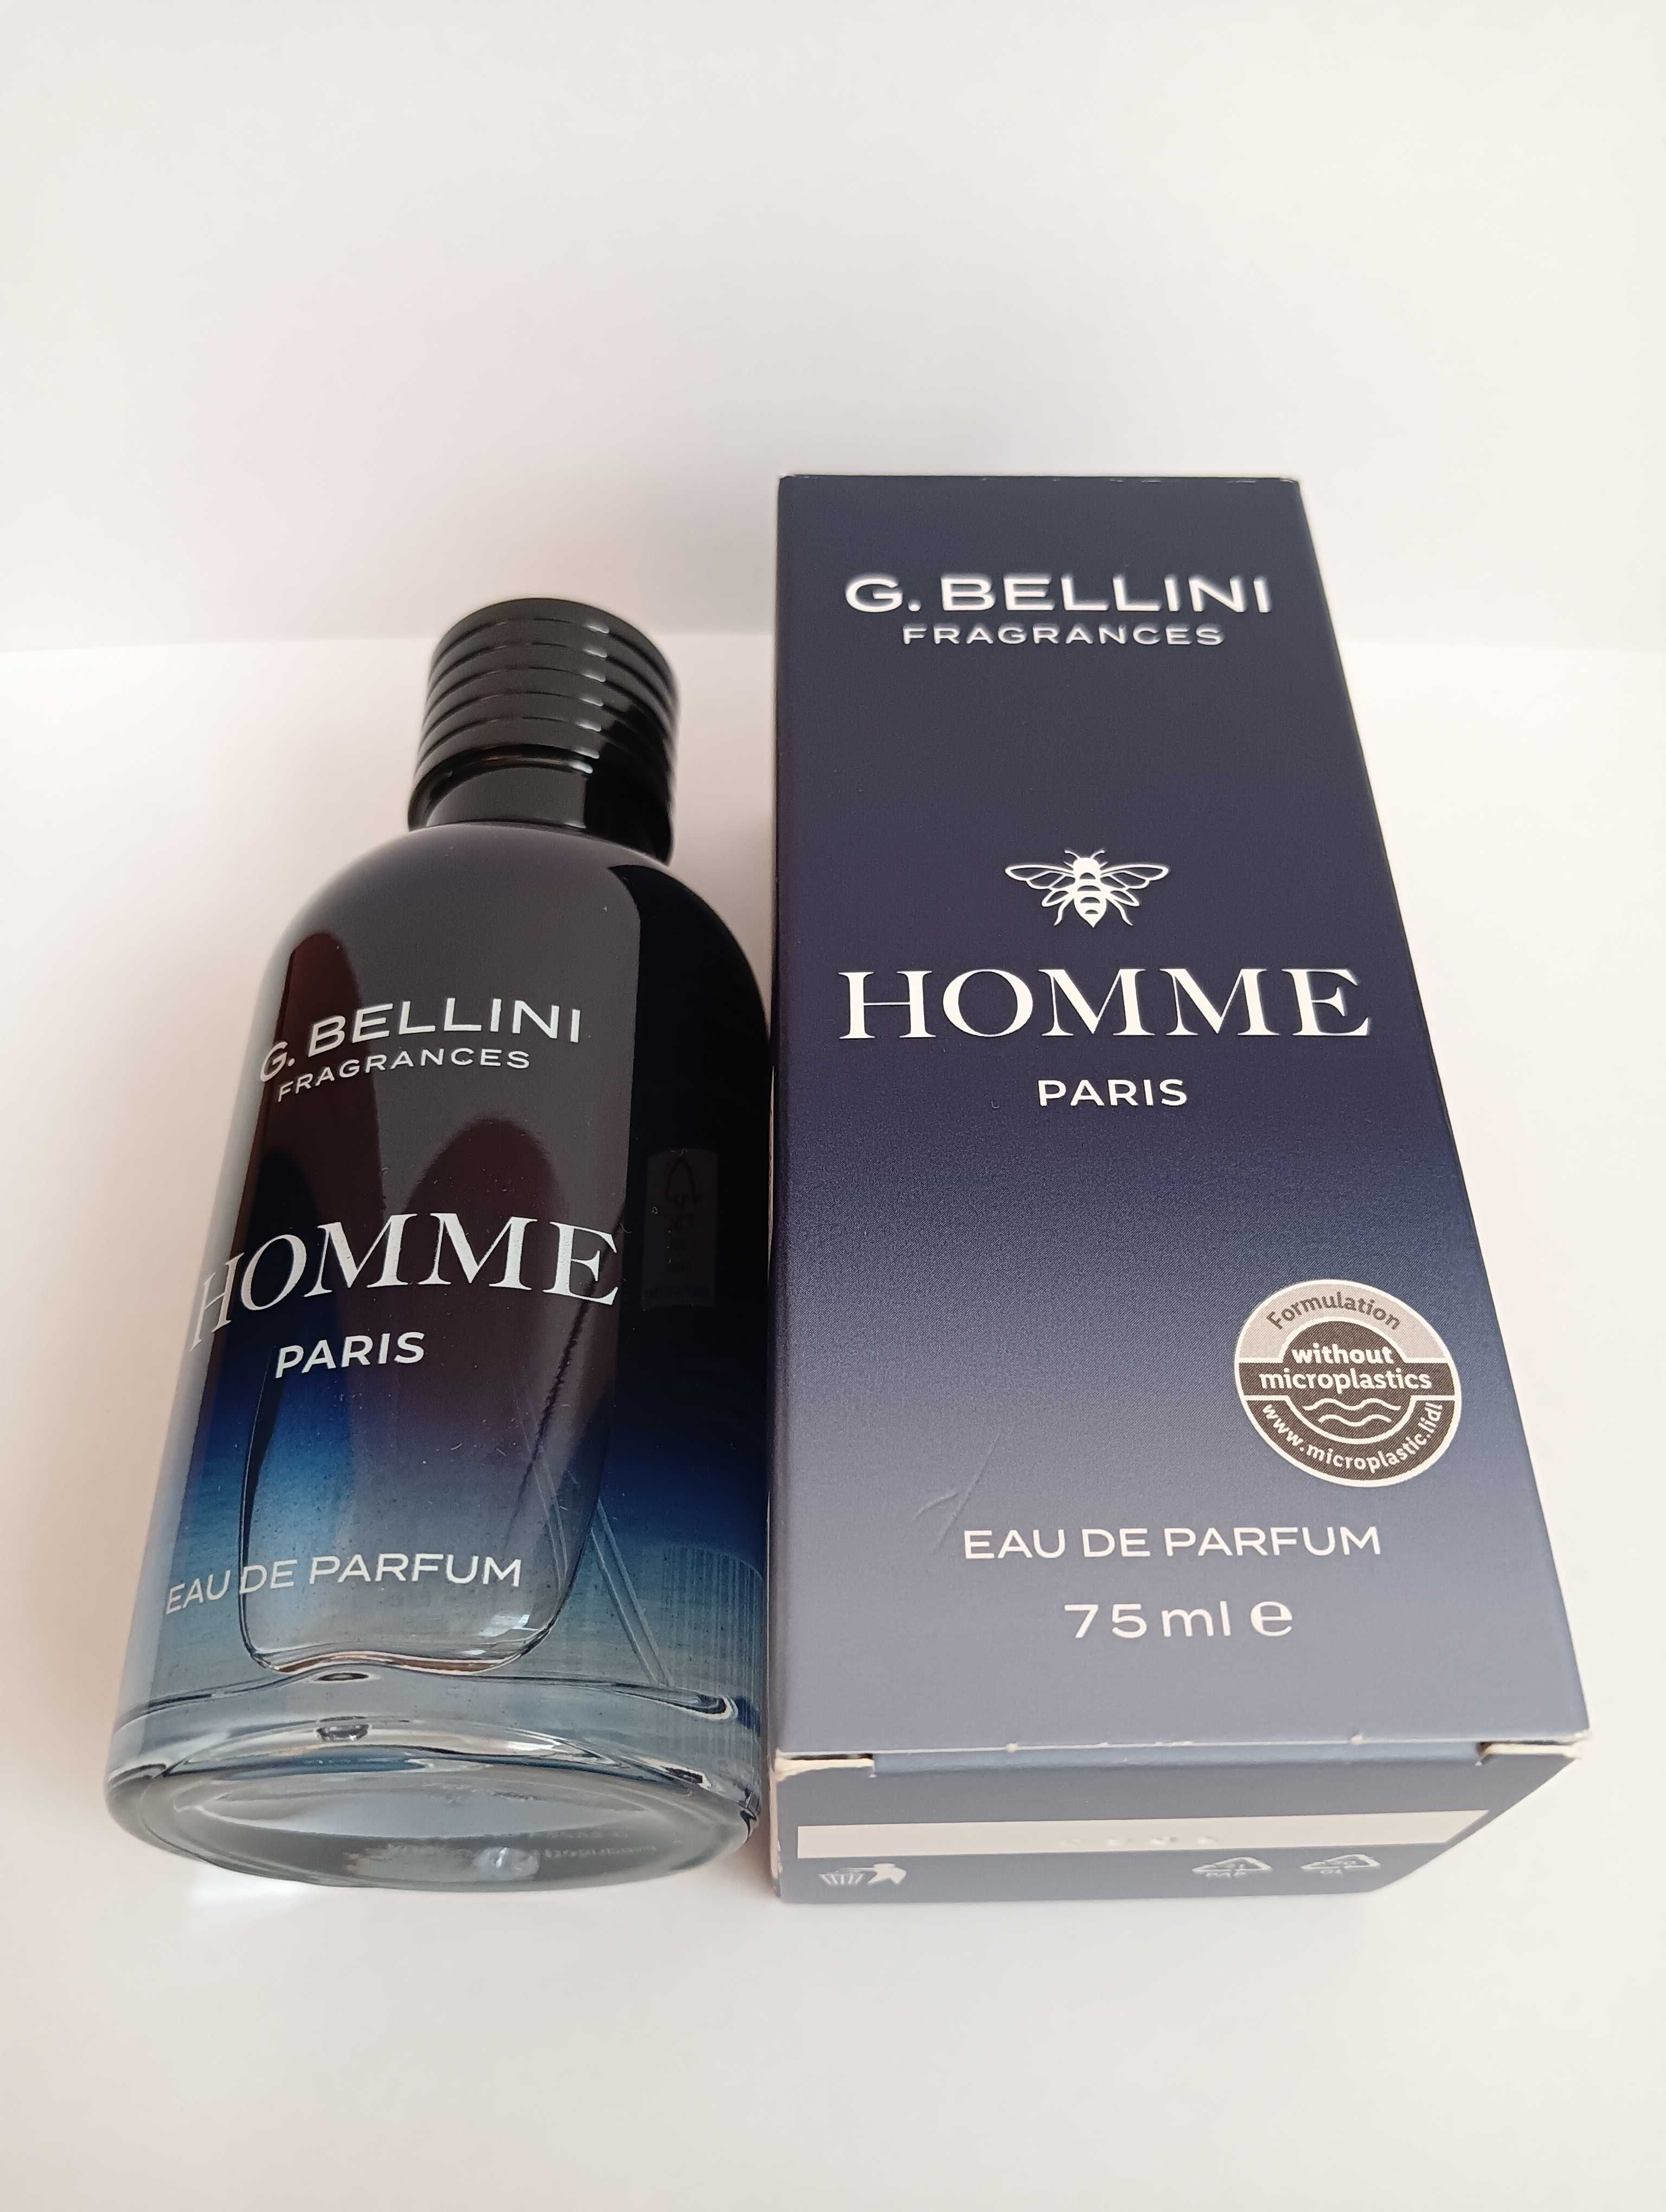 Dior Sauvage odp. G. Bellini HOMME